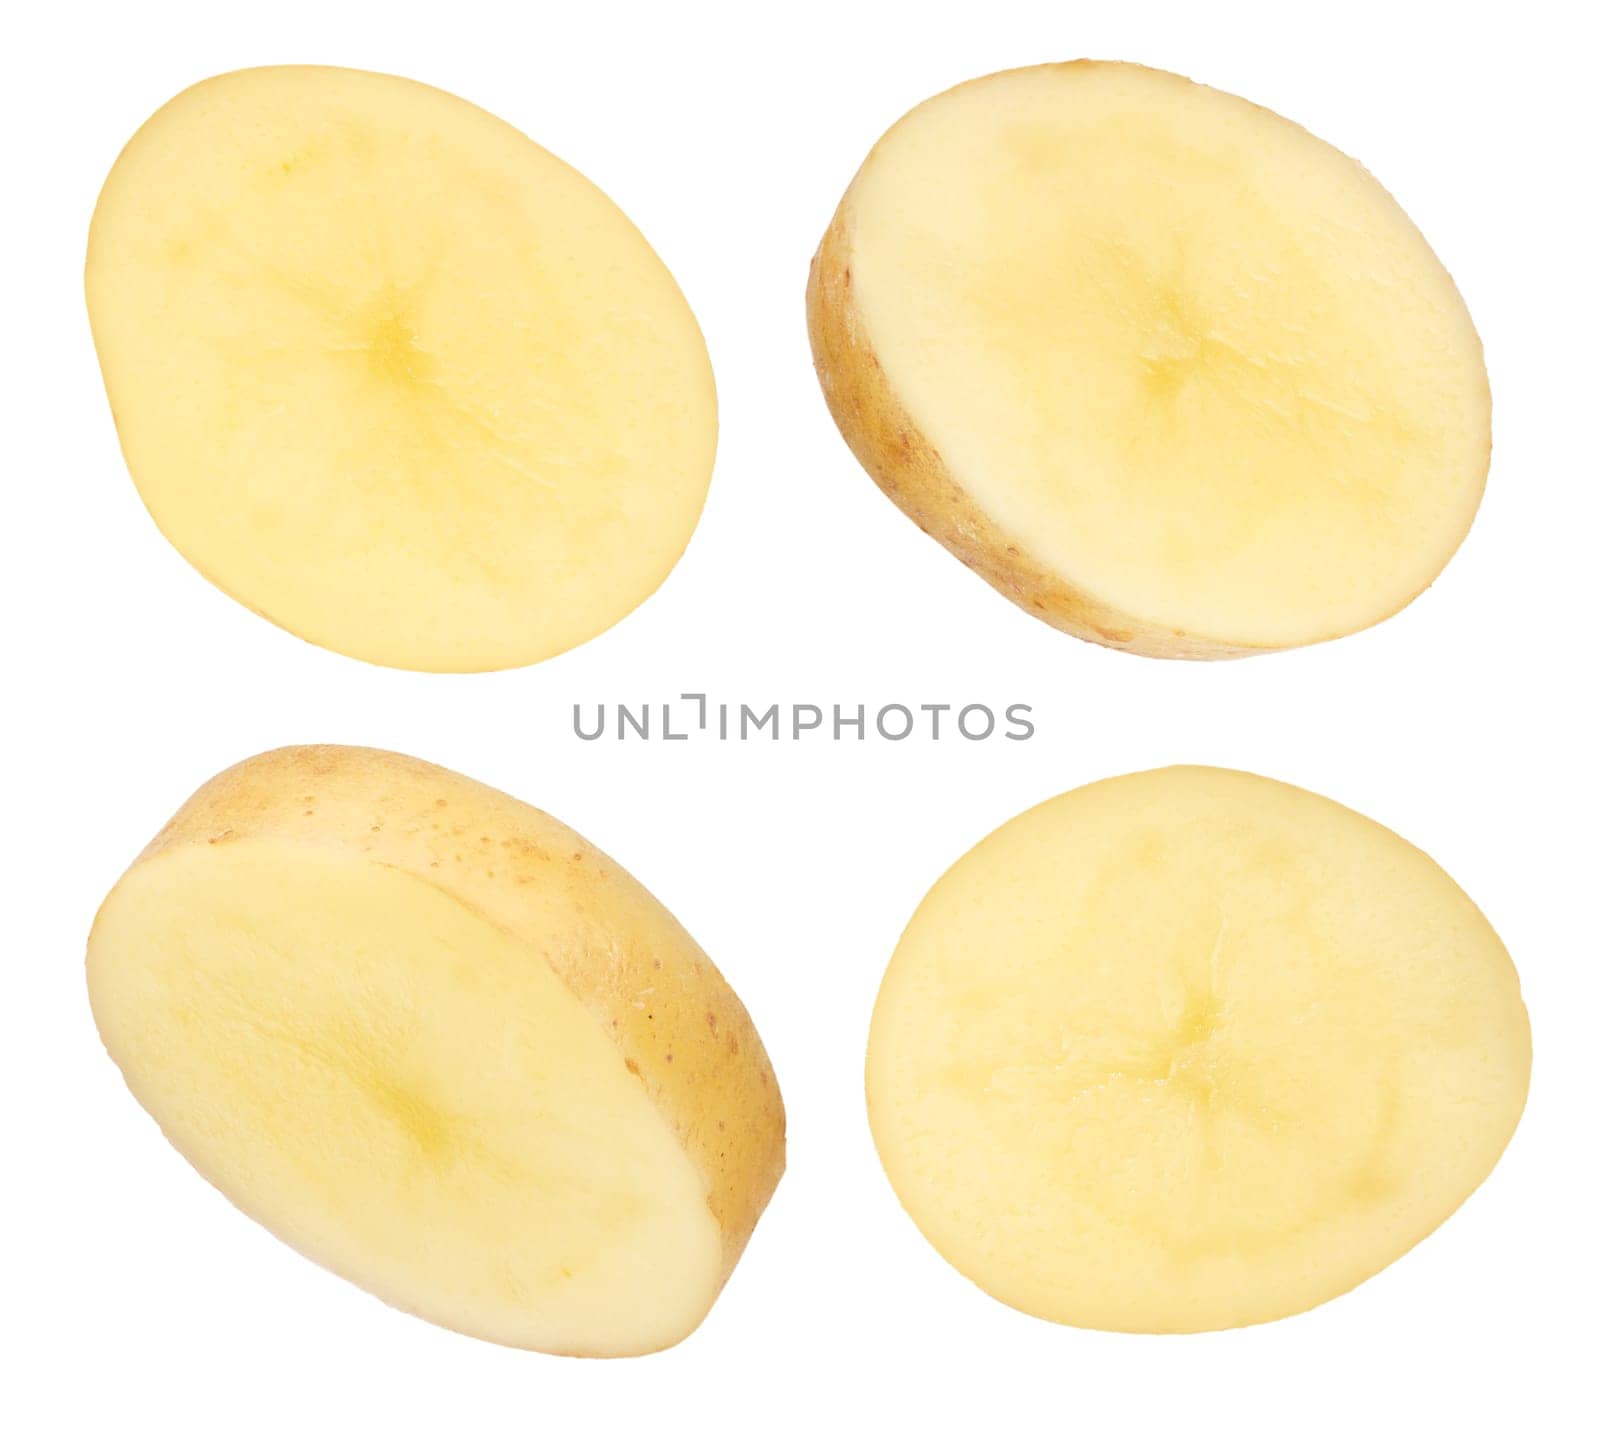 Raw vegetables. Potato wedges with peel isolated on white background. The concept of not healthy eating or obesity from potatoes. To be inserted into a design or project. by SERSOL